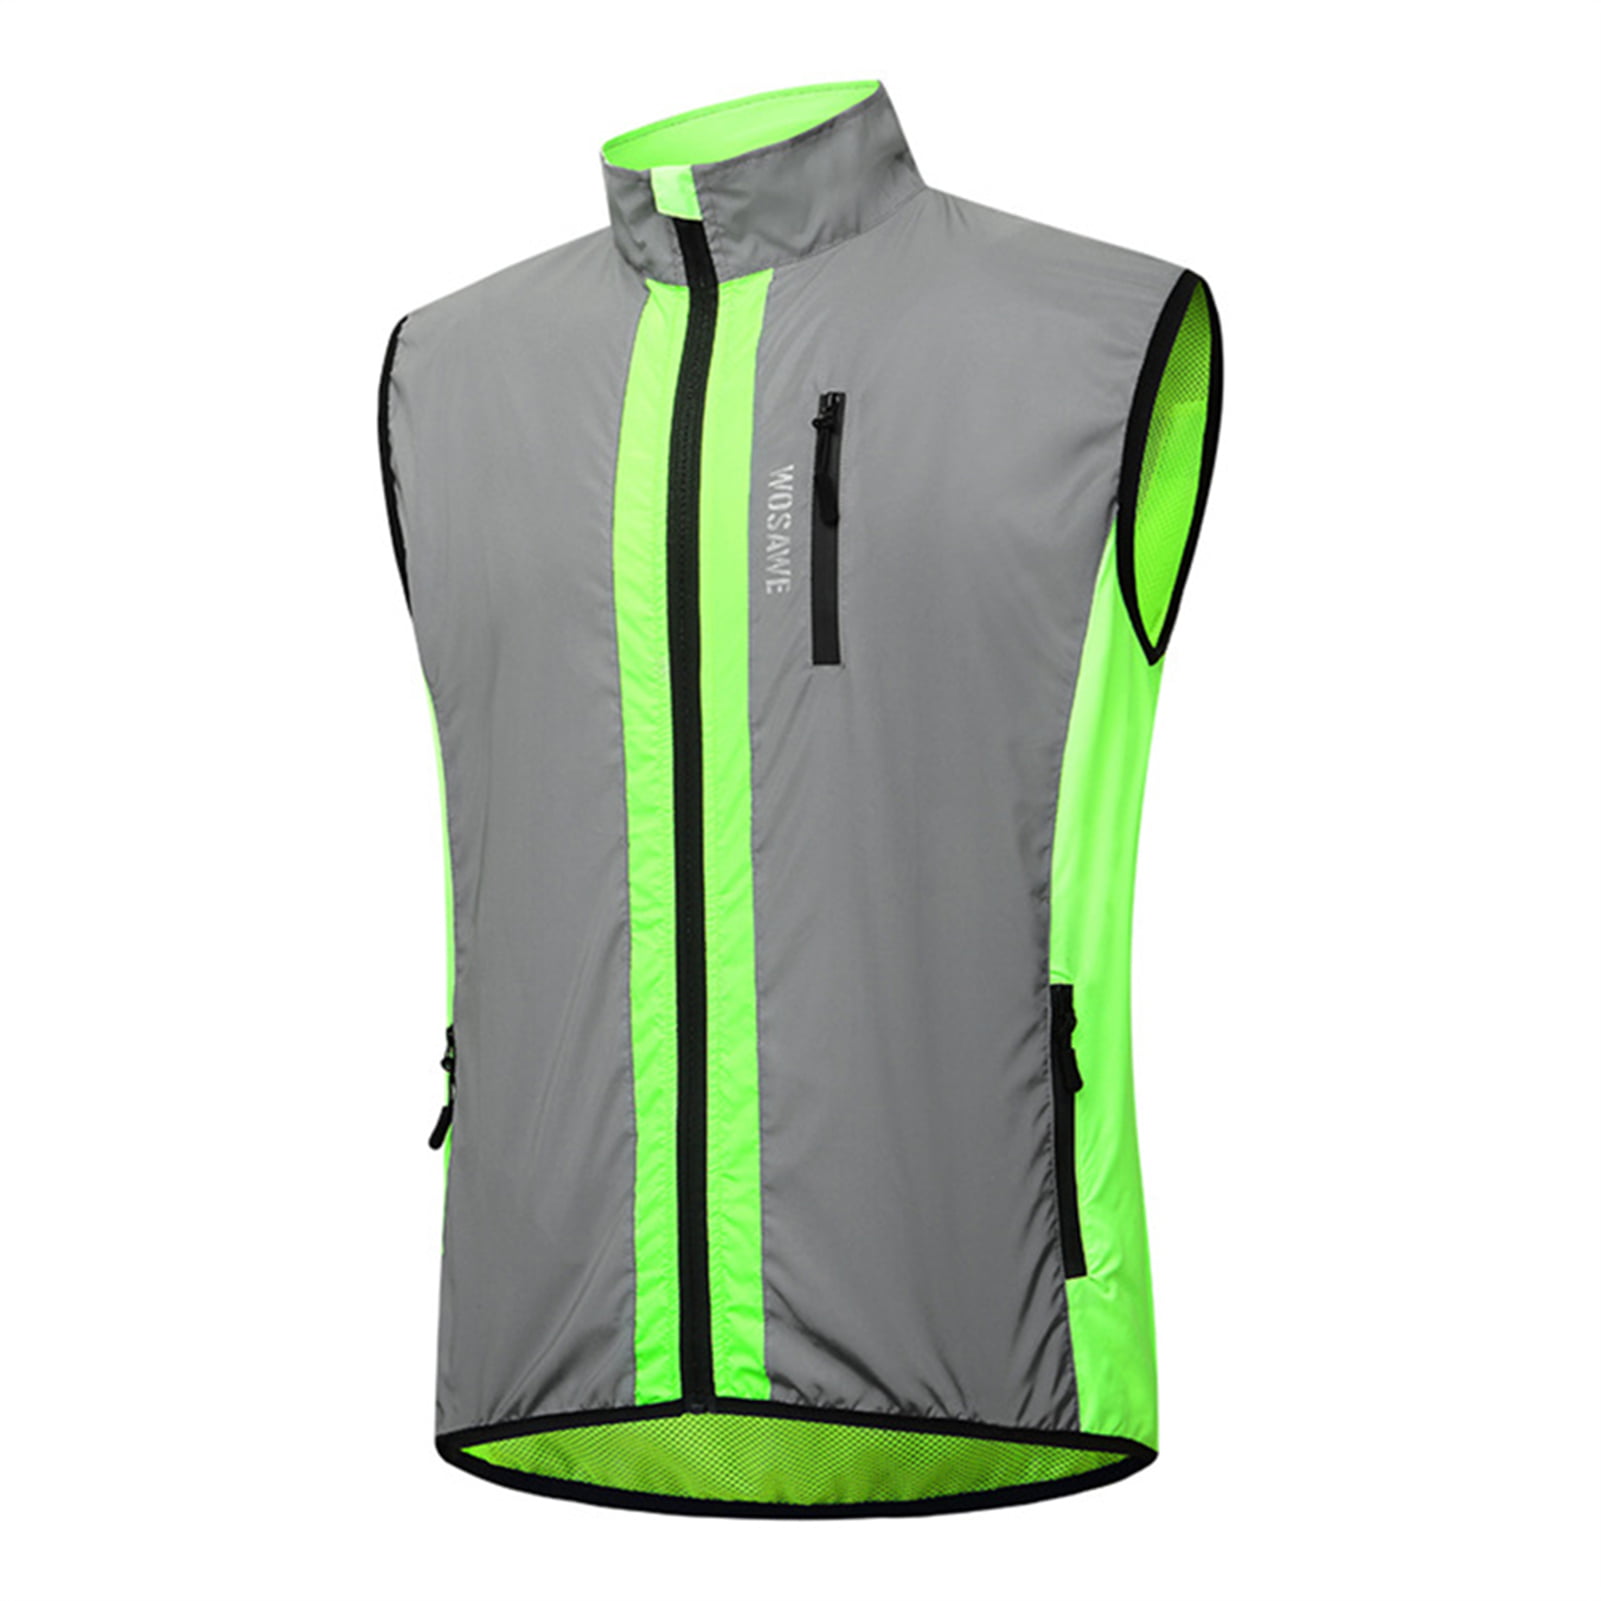 Durable LED Reflective Vest Running Vest with Phone Holder,Workout Gear with Key Pouch,USB Rechargeable Light Up Vest Water Resistant-Fit and Comfortable Adjustable Waistband,Lightweight Breathable 